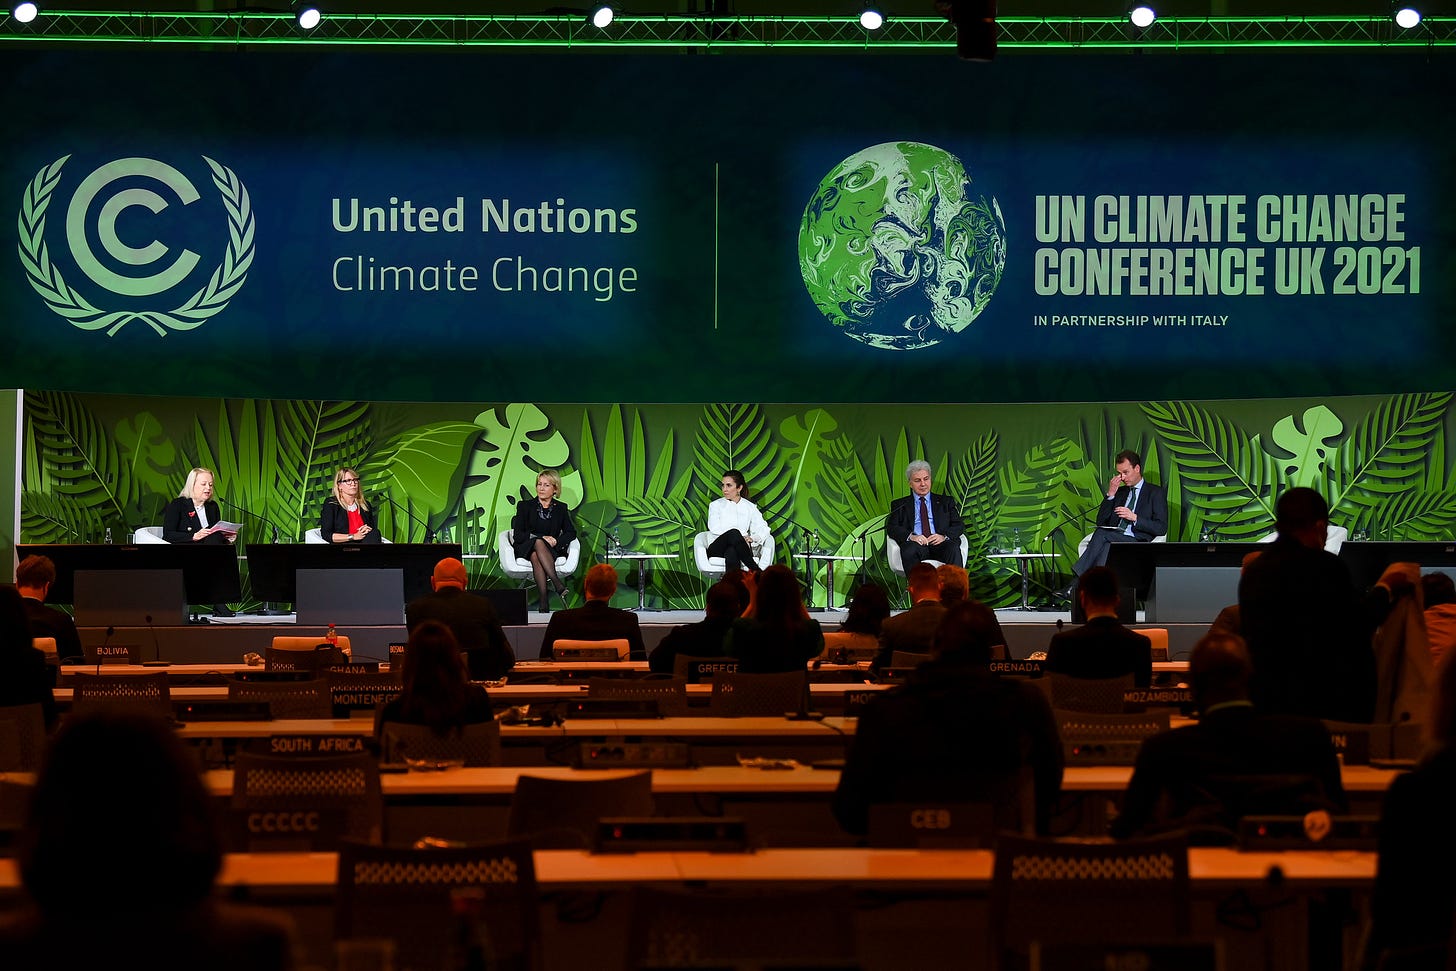 (Left to right) Mary Shapiro, Jennifer Morris, Elizabeth Corley, Fernanda Mello, Saker Nusseibeh and Frank Elderson speaking at the Forest event during COP26 in Glasgow on November 2, 2021 (Image: Karwai Tang/UK Government via COP26; CC BY-NC-ND 2.0)